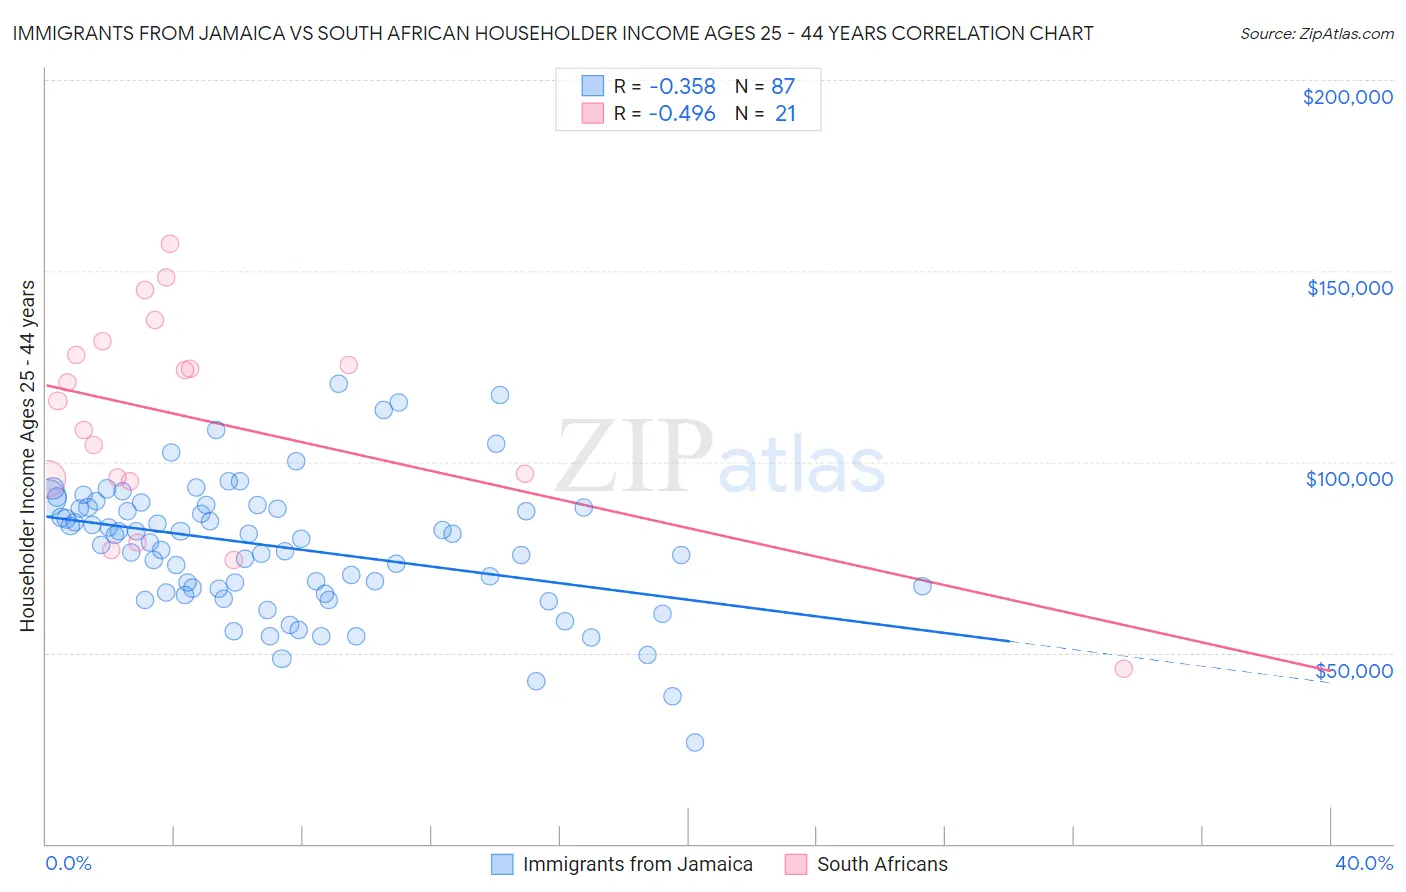 Immigrants from Jamaica vs South African Householder Income Ages 25 - 44 years